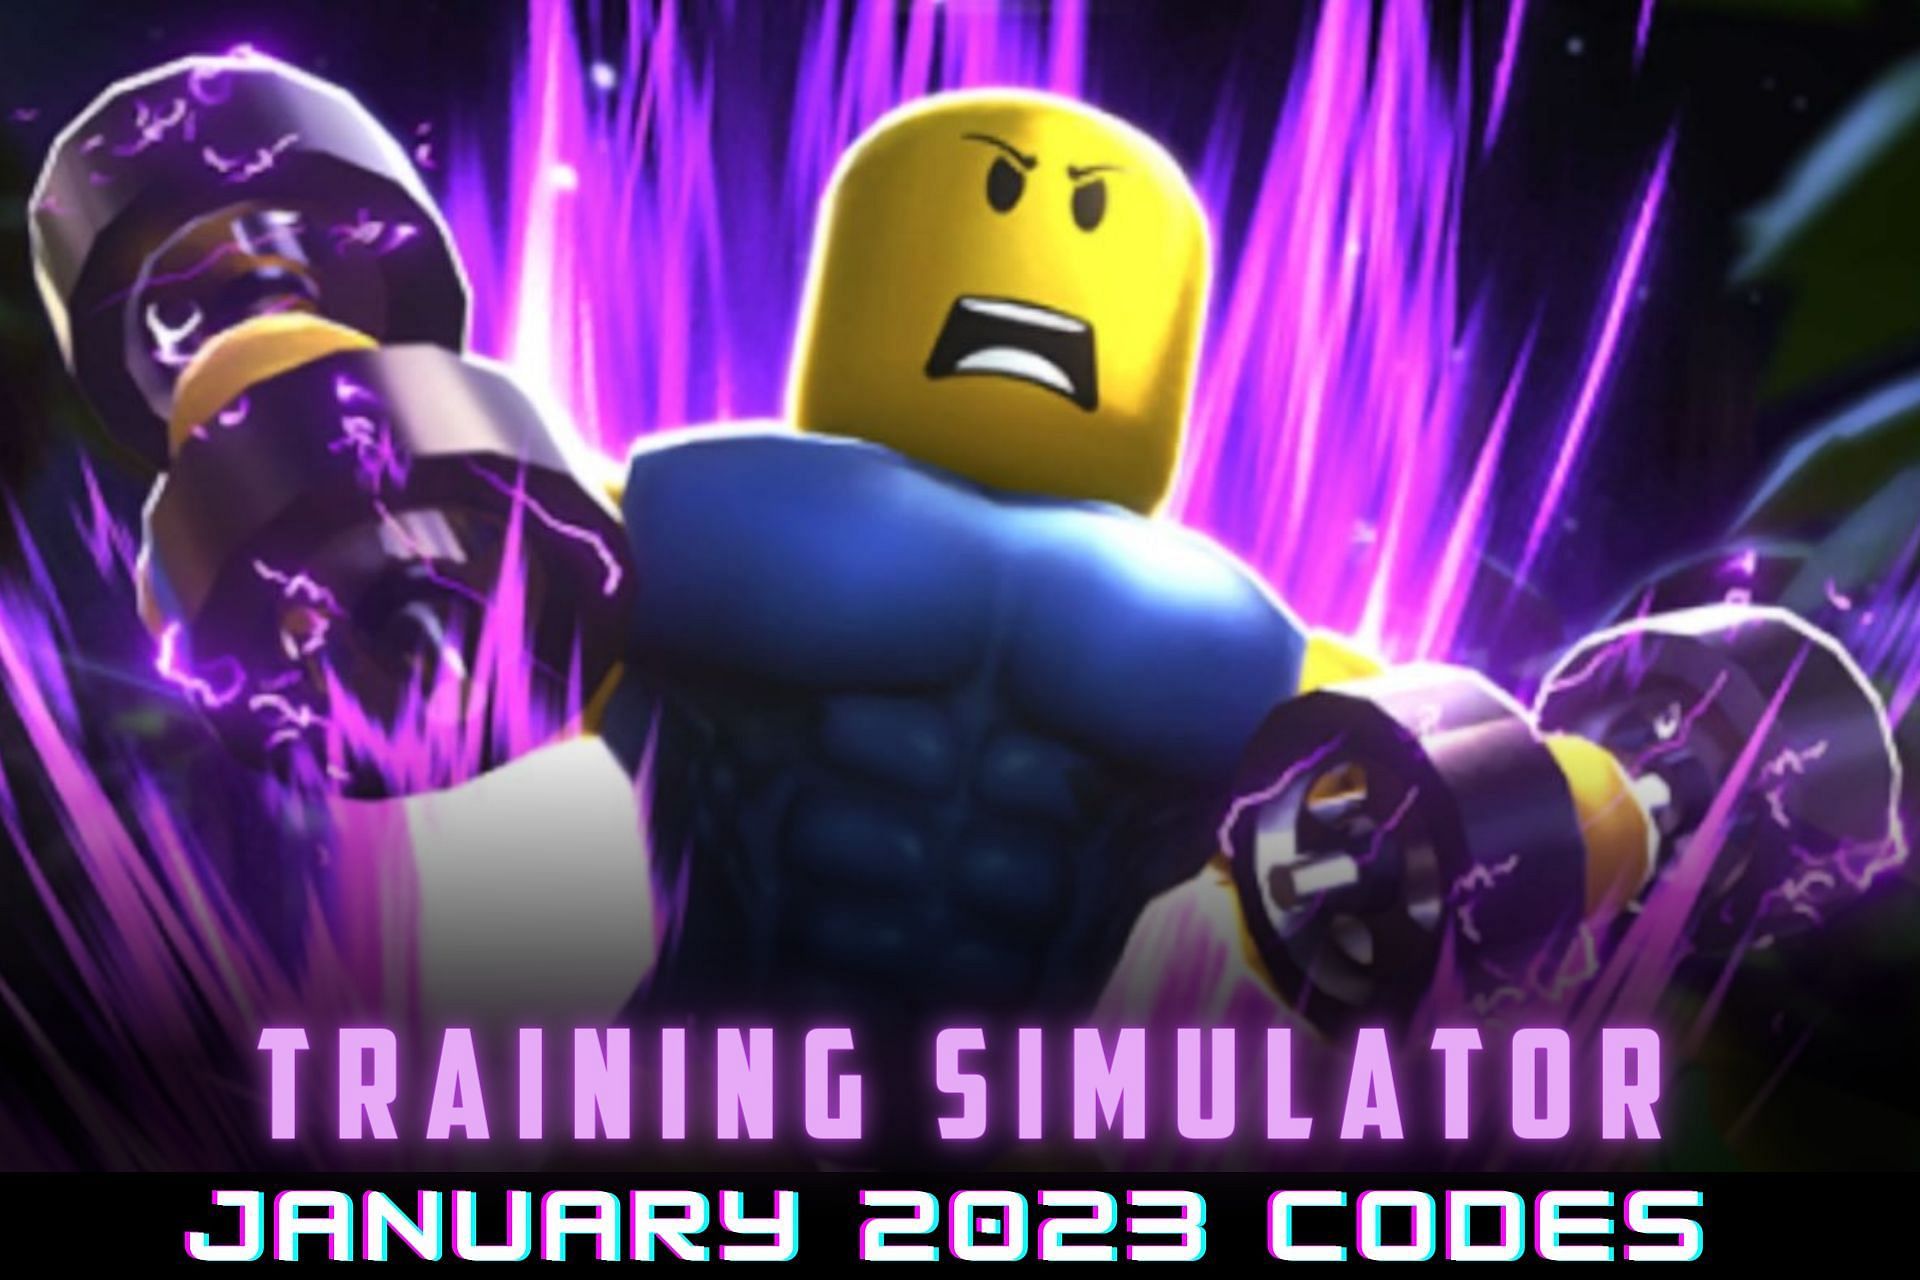 Roblox Training Simulator Codes For January 2023 Free Crystals